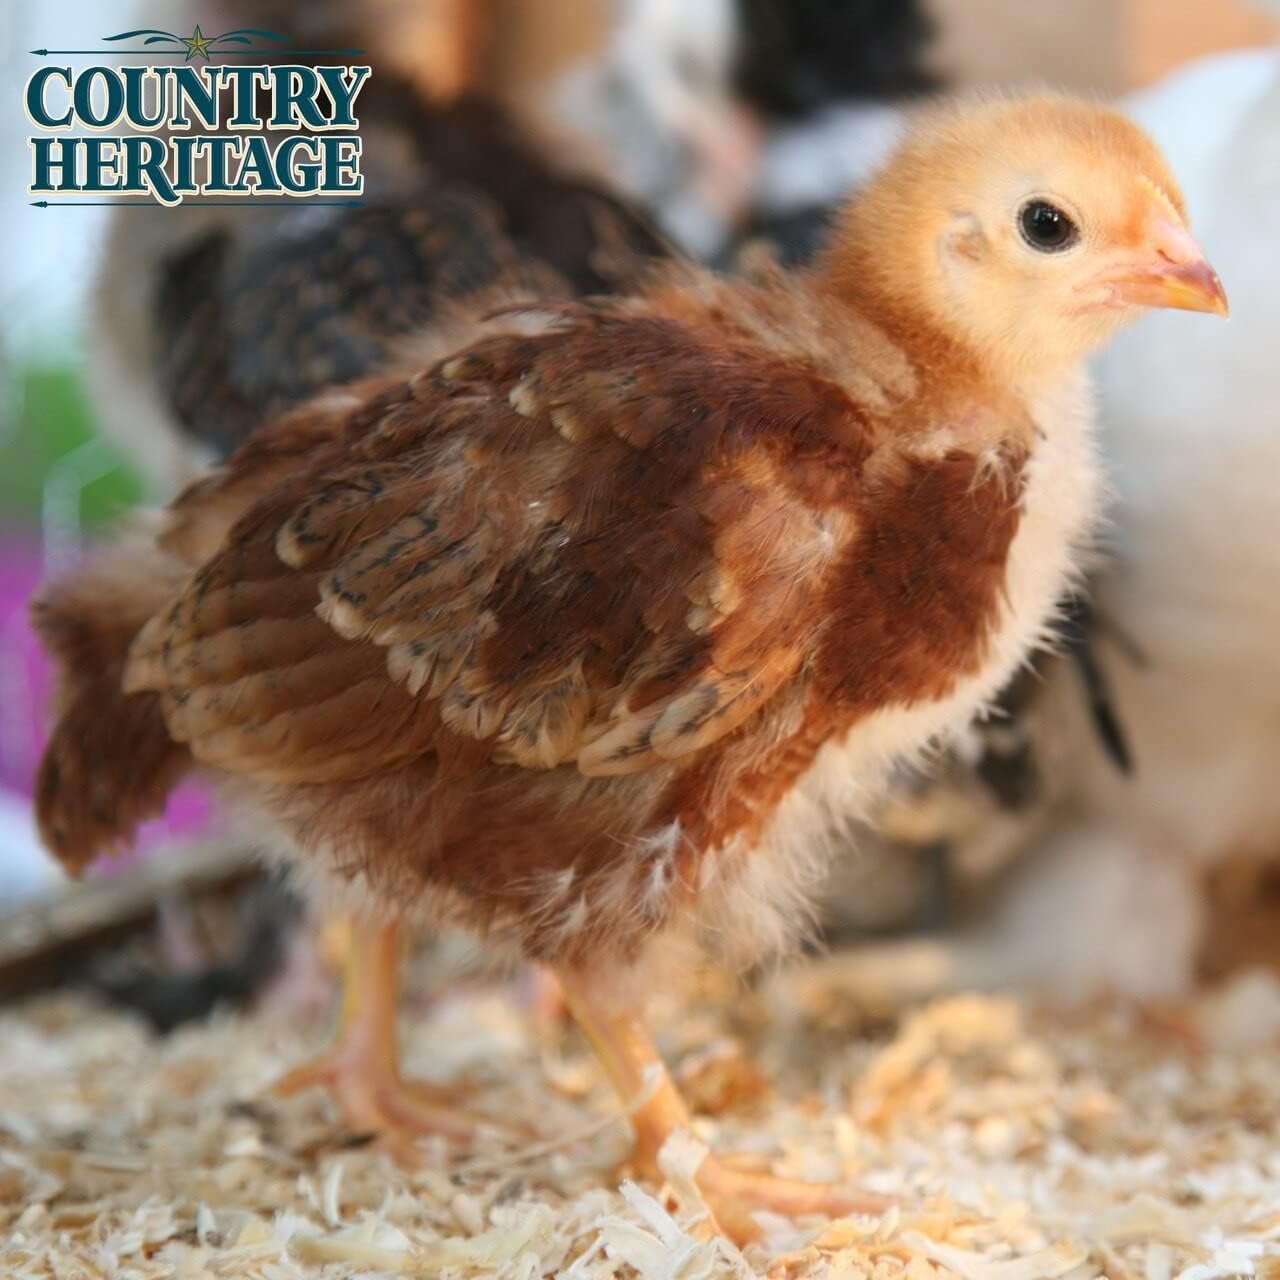 Country Heritage Chicken Layer Crumble Feed for Egg Layers 50 Pounds